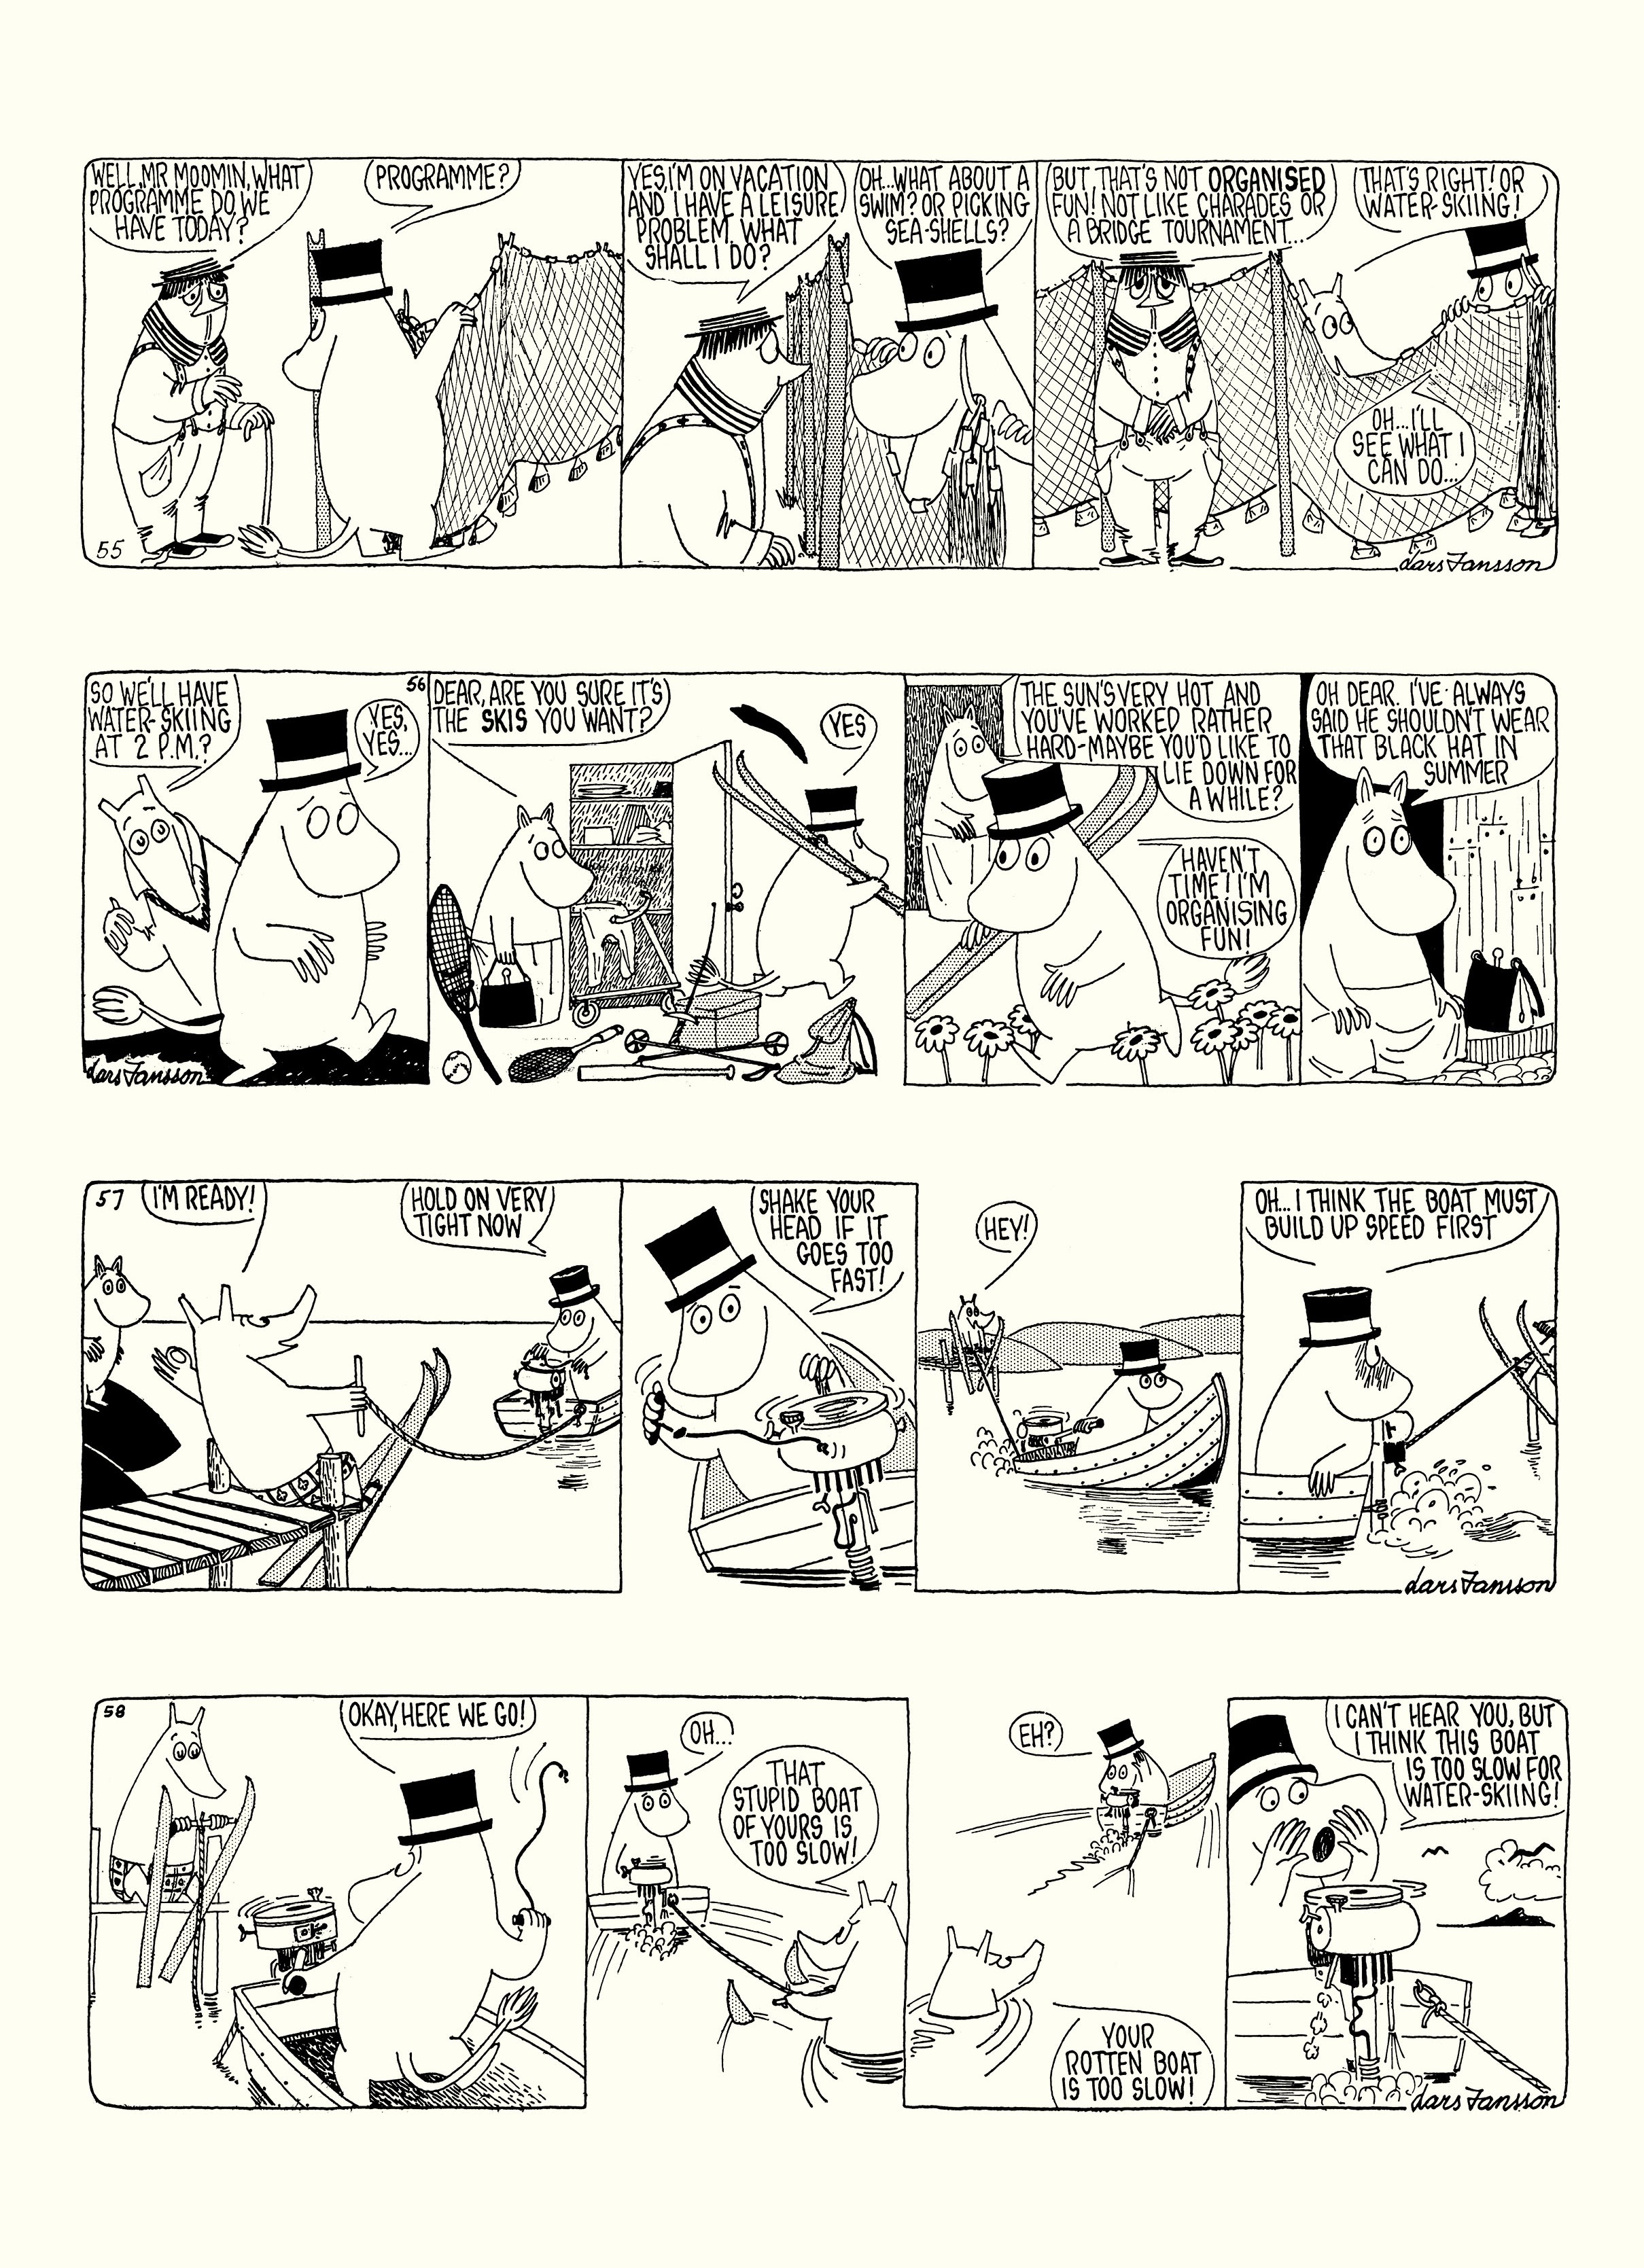 Read online Moomin: The Complete Lars Jansson Comic Strip comic -  Issue # TPB 8 - 65